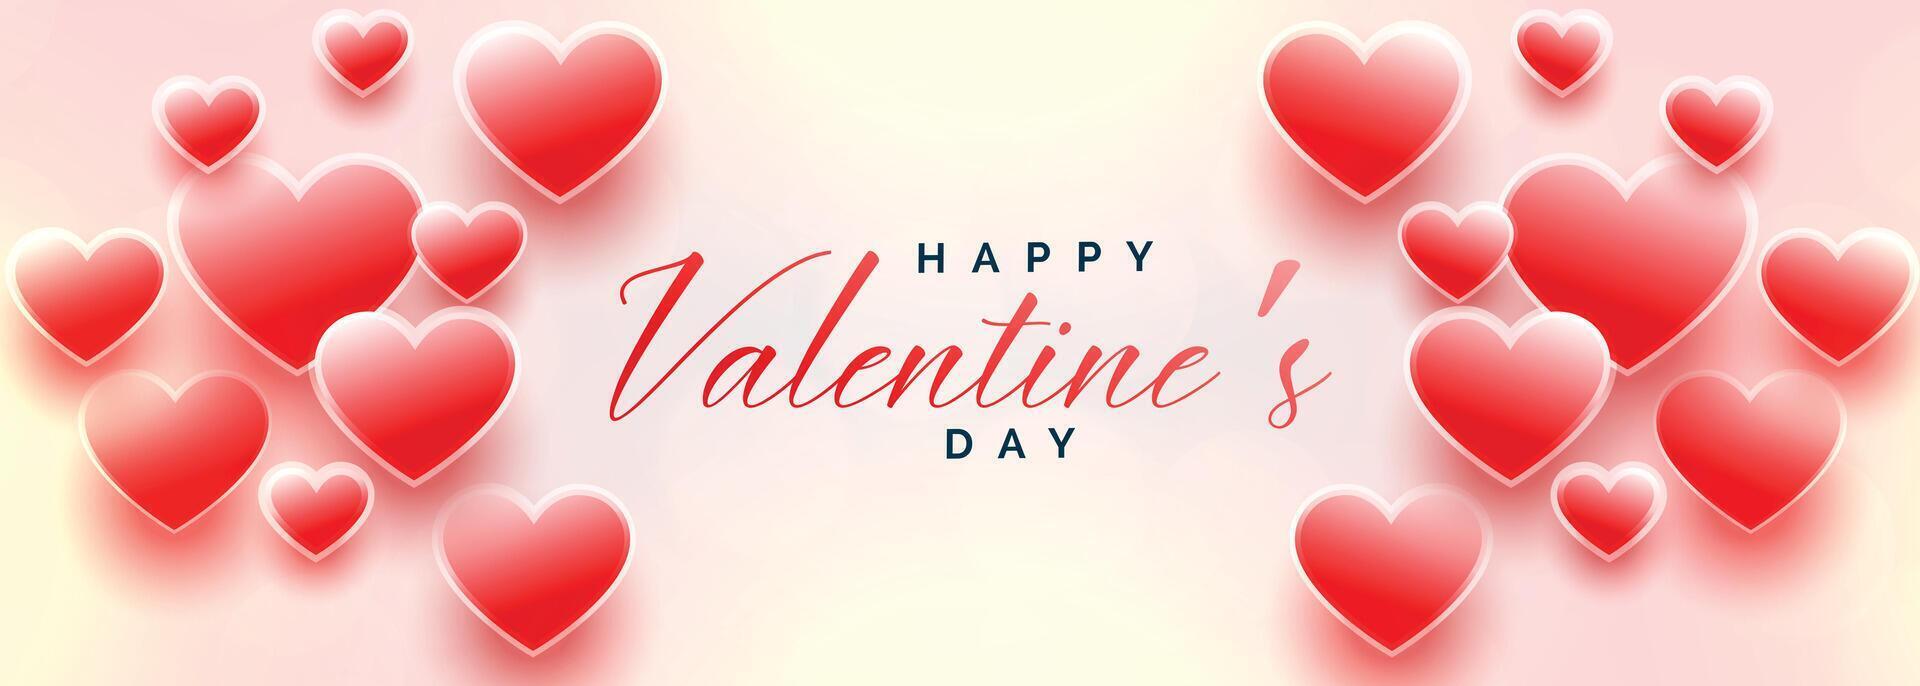 lovely valentines day banner with many hearts vector